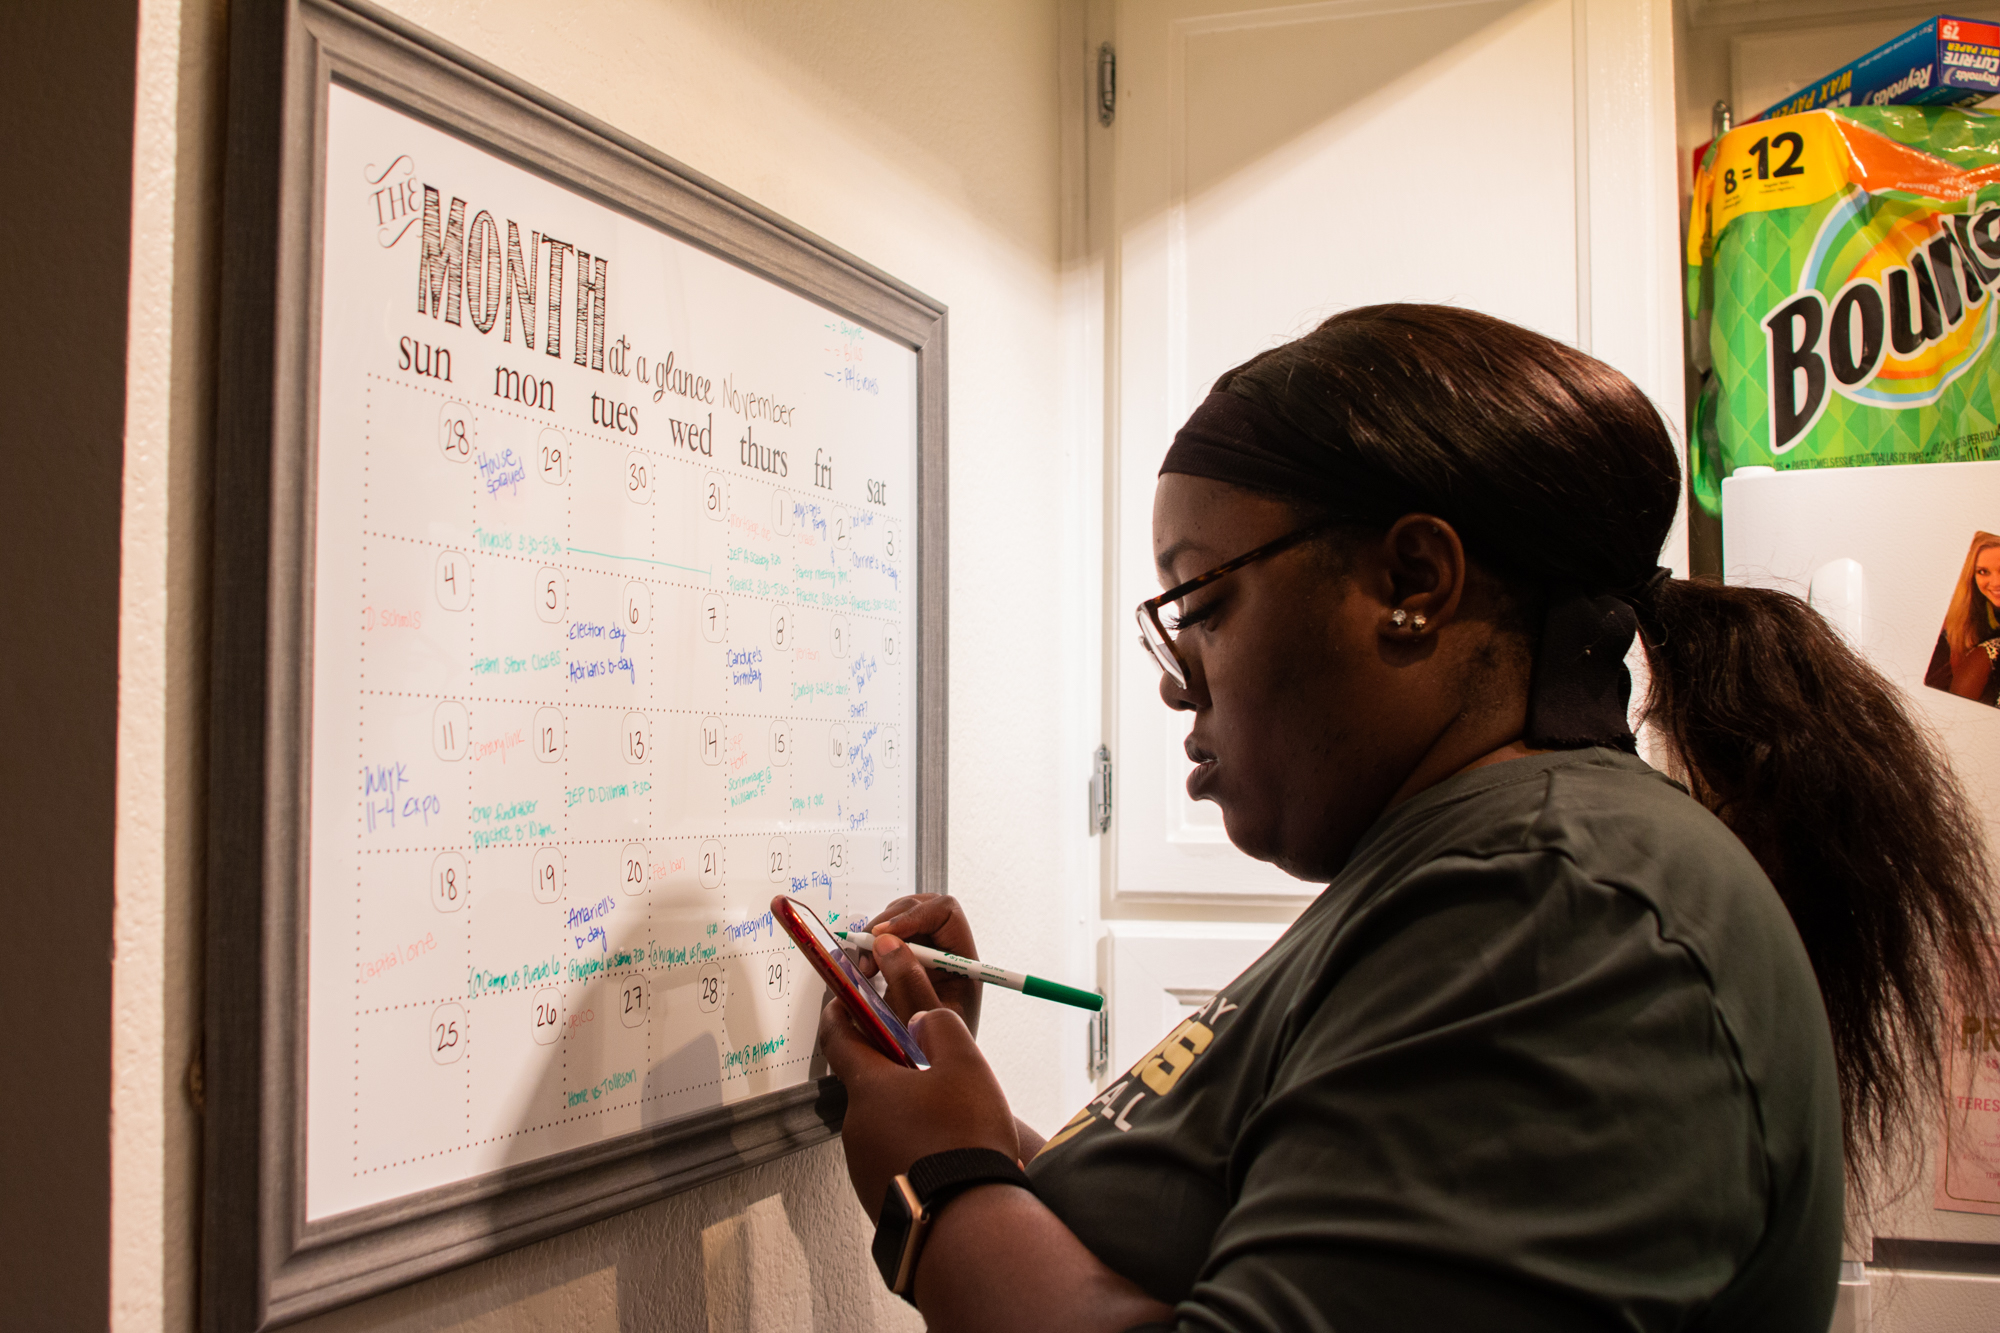  Chiniqua Bright adds items to her calendar early in the morning on Nov. 15, 2018. She said the calendar helps keep all of her obligations straight. In addition to coaching practices and attending games, she frequently attends Individualized Educatio